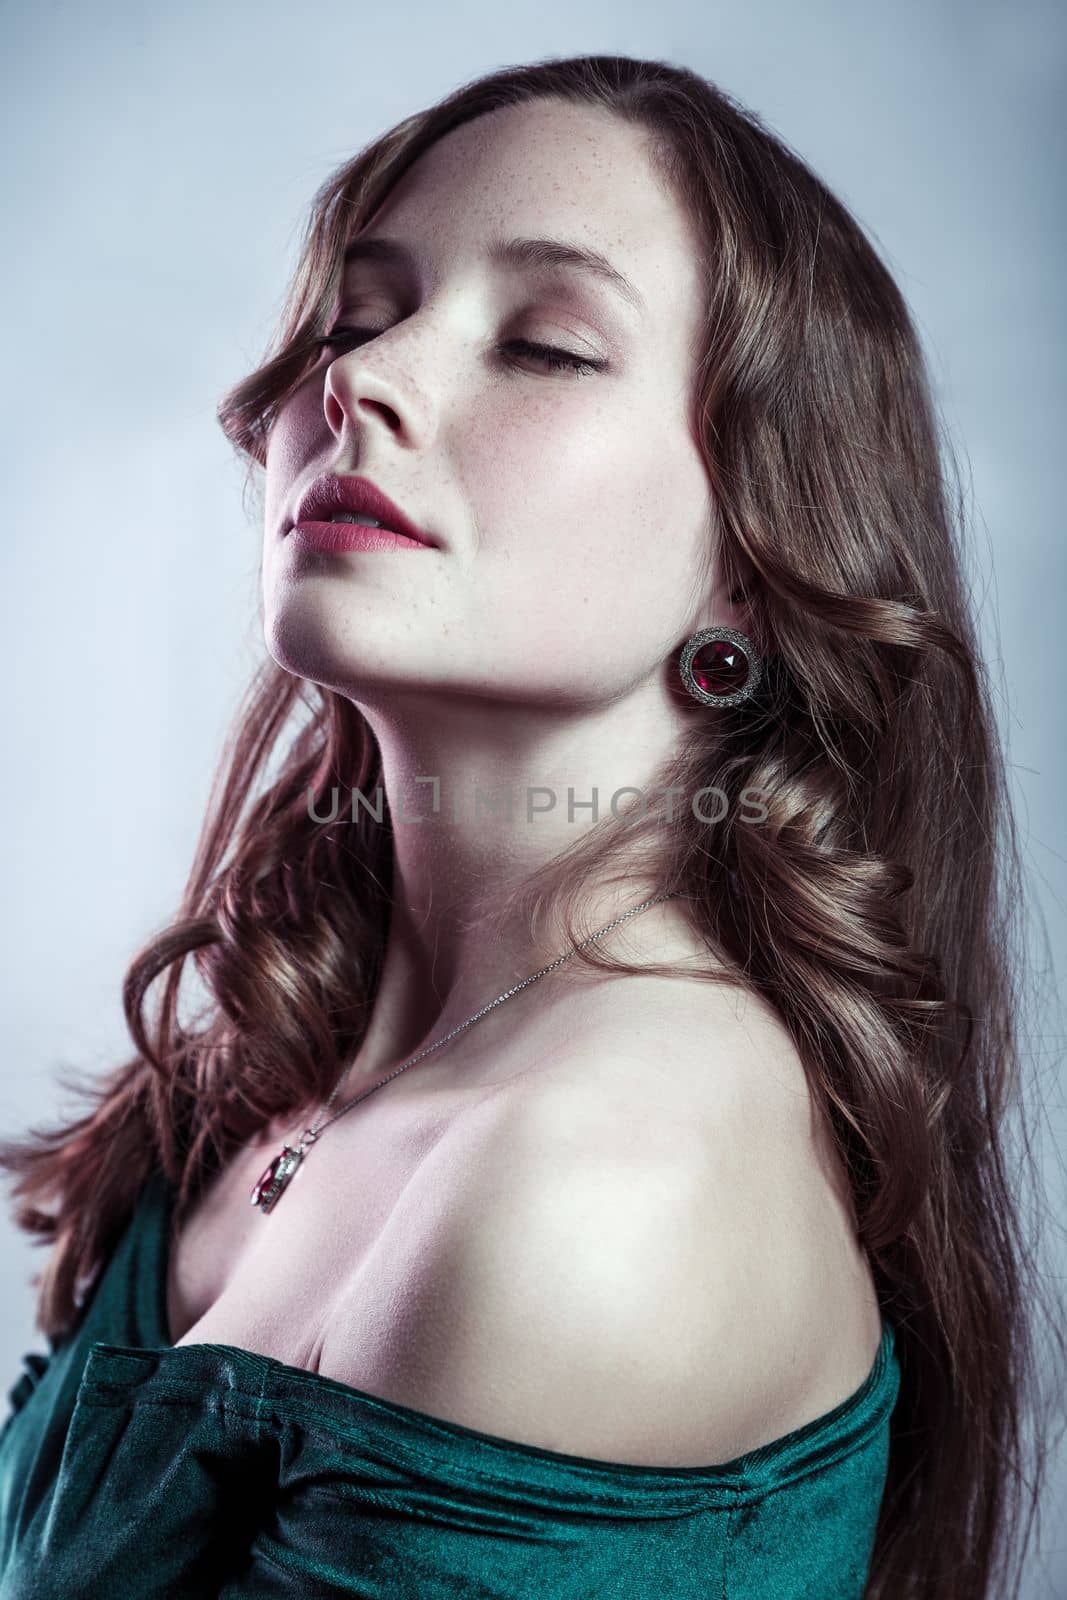 Relaxed calm winsome woman with beautiful earrings showing her bare shoulders, keeps eyes closed. by Khosro1